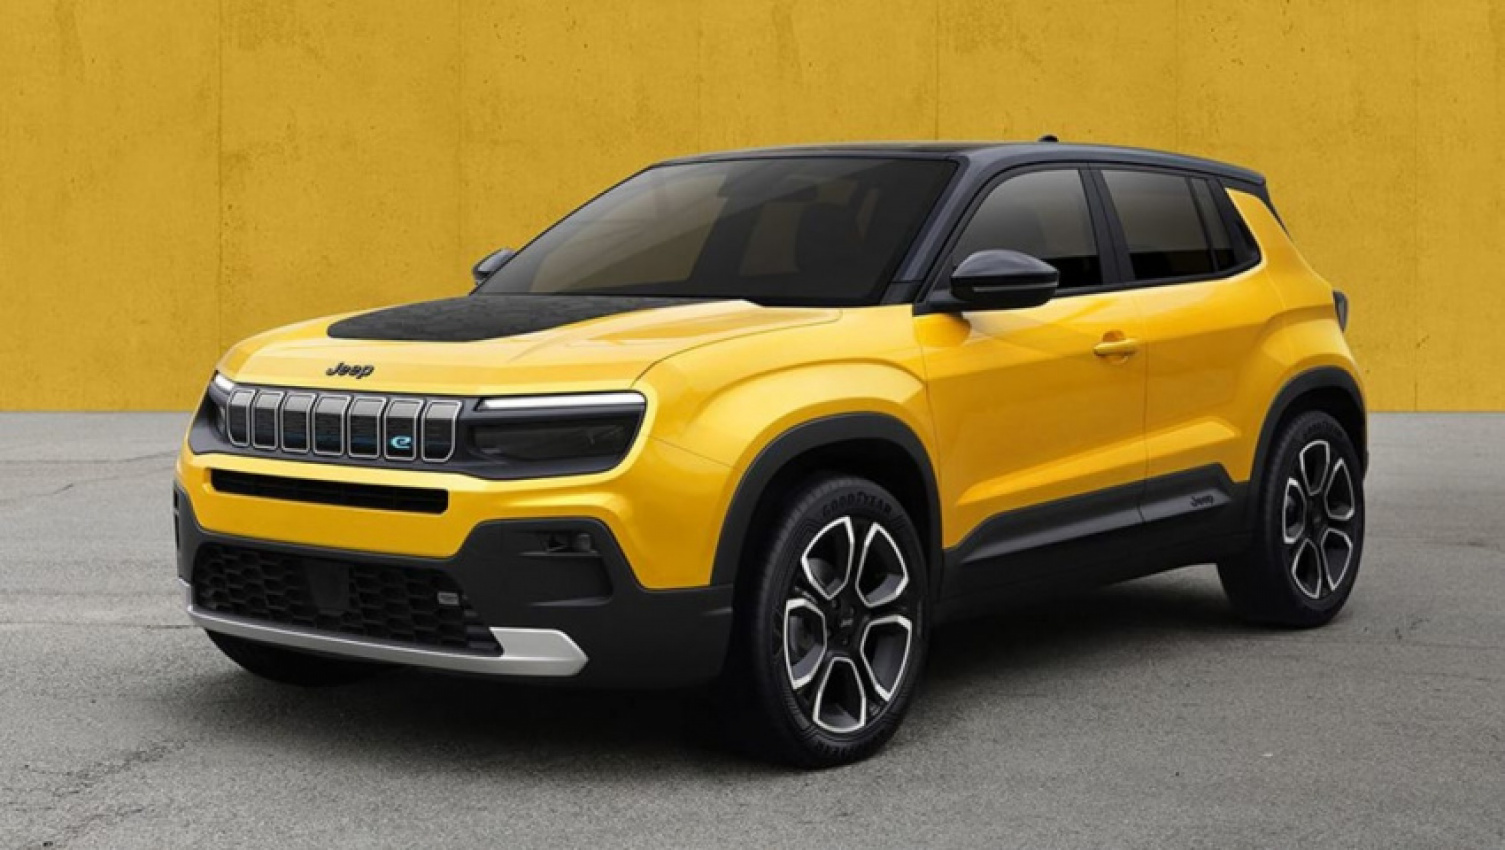 autos, cars, hyundai, jeep, mg, tesla, electric, electric cars, hyundai kona, industry news, jeep news, jeep suv range, mg zs, showroom news, off-roading in an electric car? jeep reveals first tailpipe emissions-free model designed to take on tesla model y, mg zs ev and hyundai kona electric